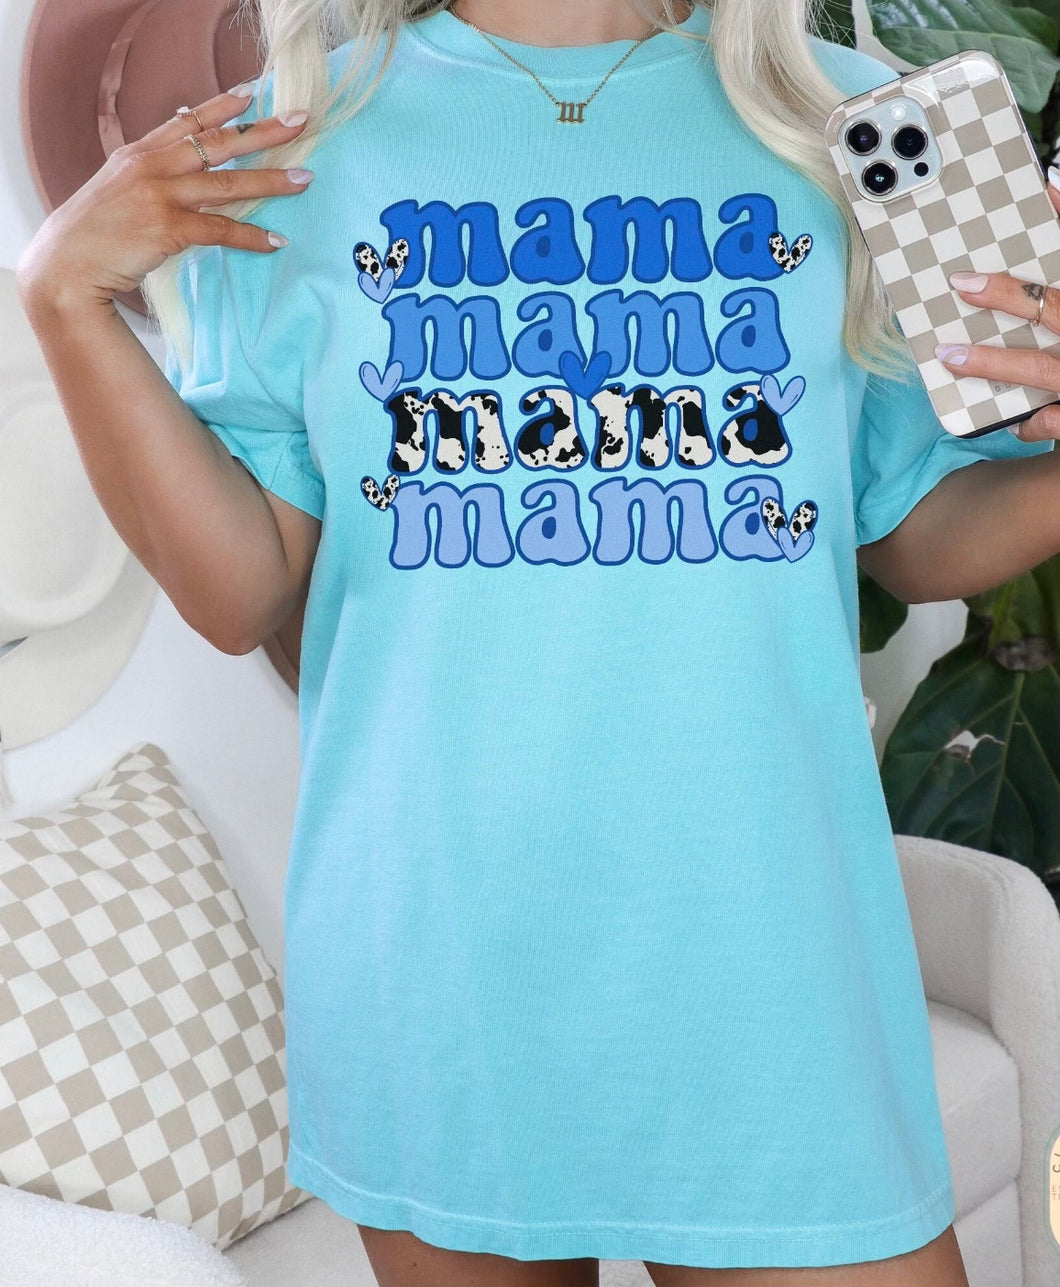 Mama blue and cowhide women’s graphic tee - Mavictoria Designs Hot Press Express